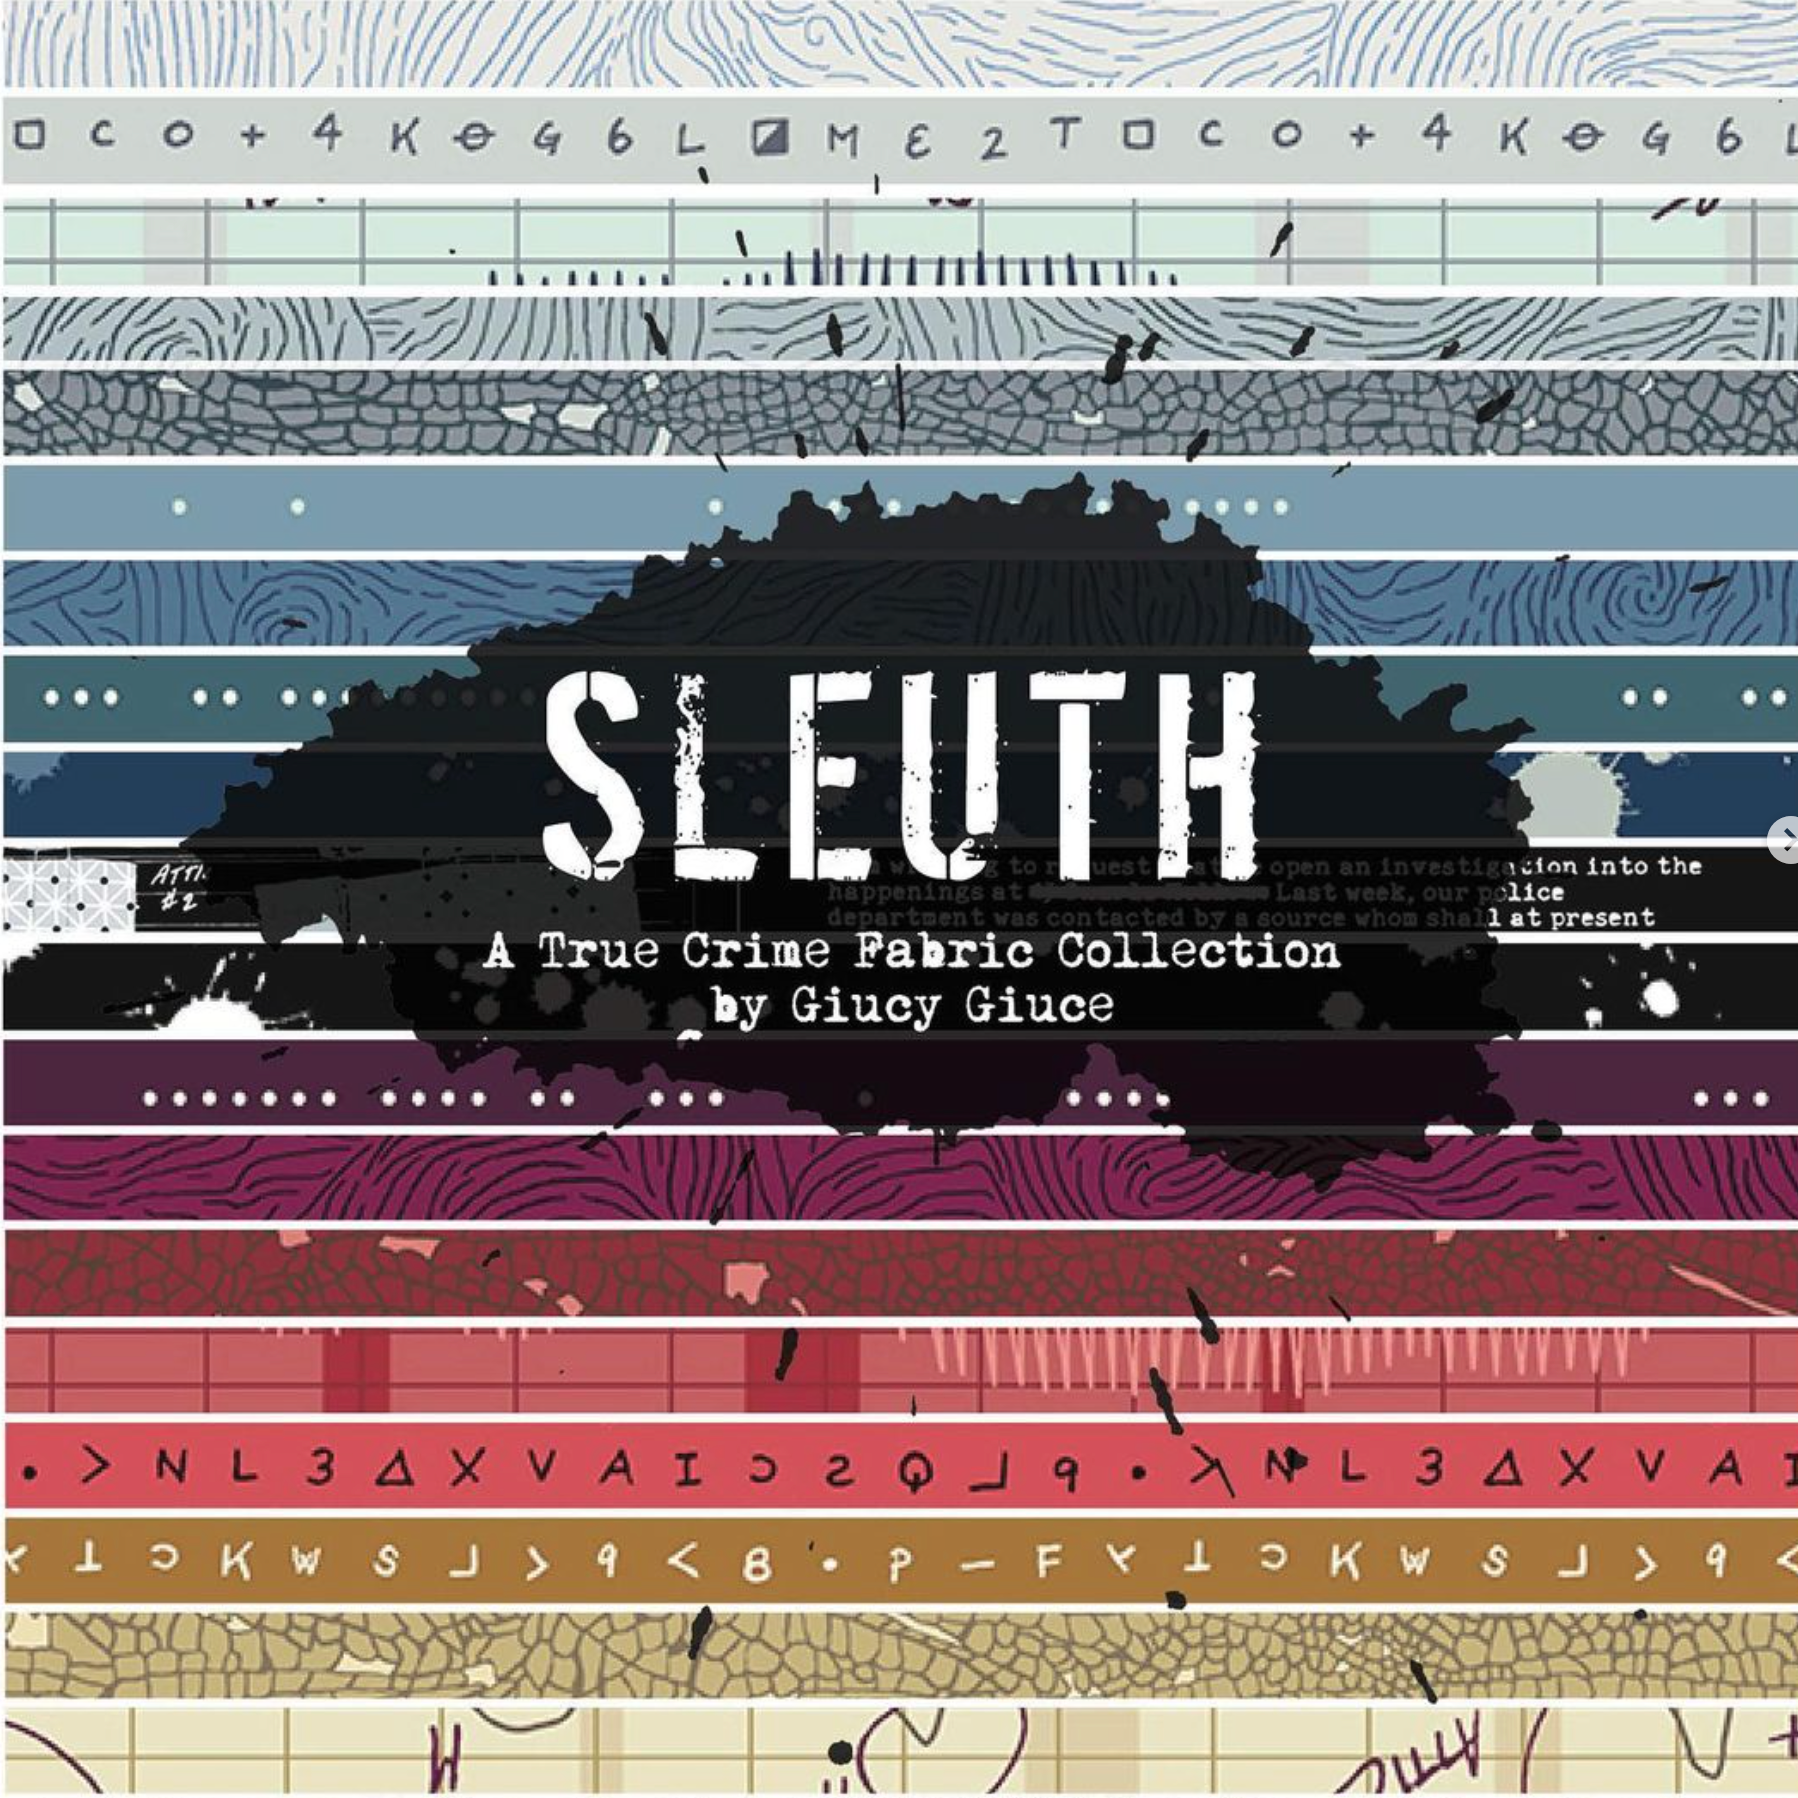 The image shows nineteen fabric swatches of various colors and patterns in horizontal strips. There is a black text overlay that says “SLEUTH” in all caps, followed by “a true crime fabric collection by Giucy Giuce.”